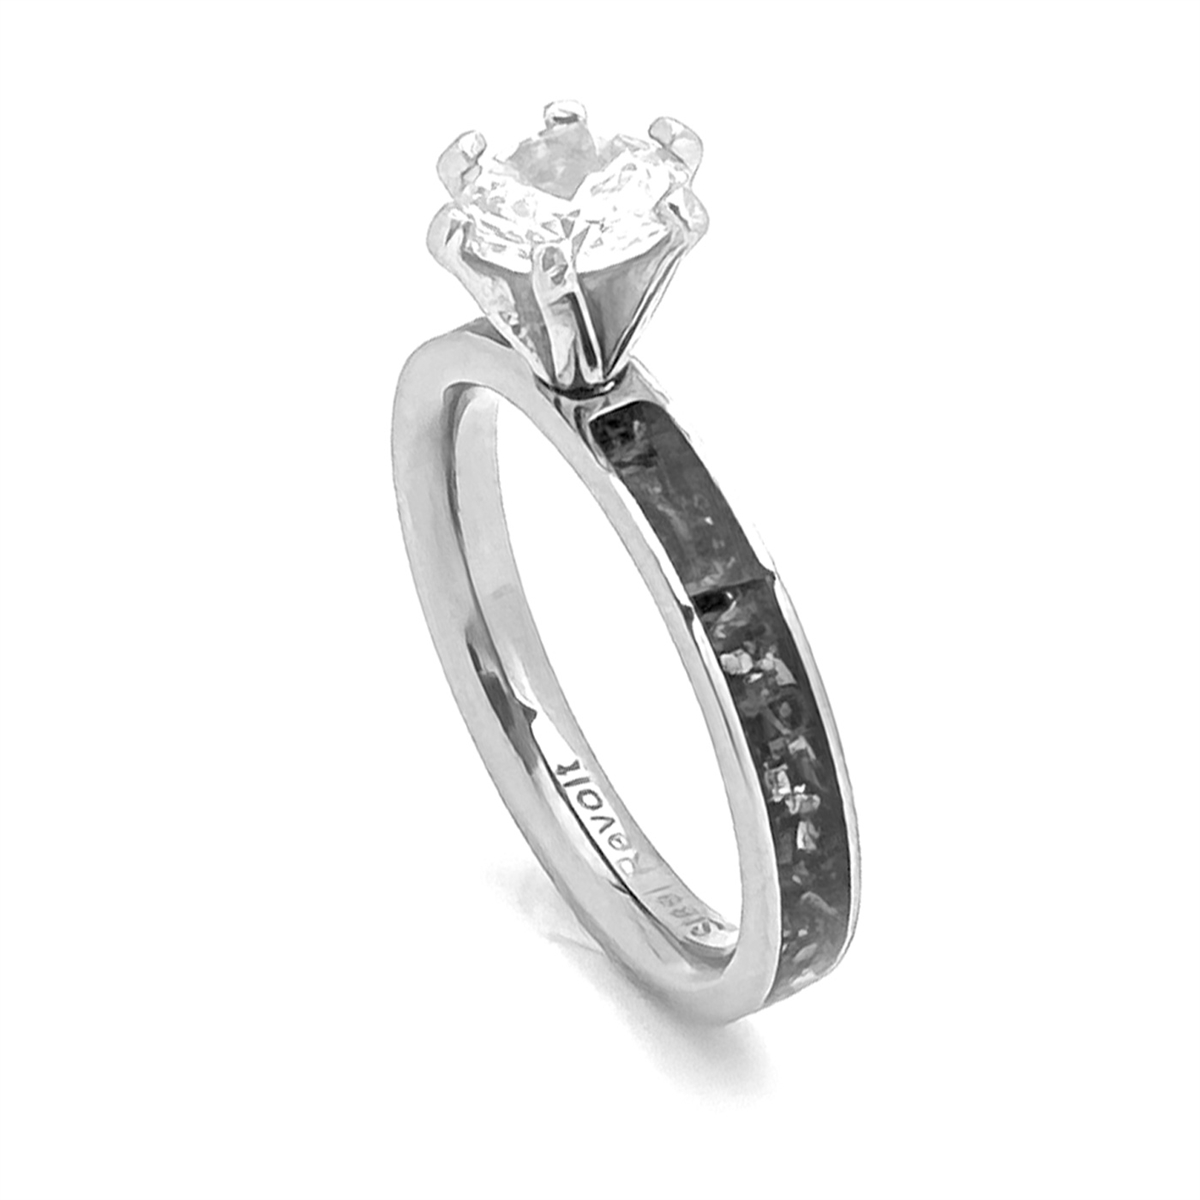 Comfort-Fit Domed CZ Engagement ring with Inlay of Meteorite Pieces by  STEEL REVOLT™